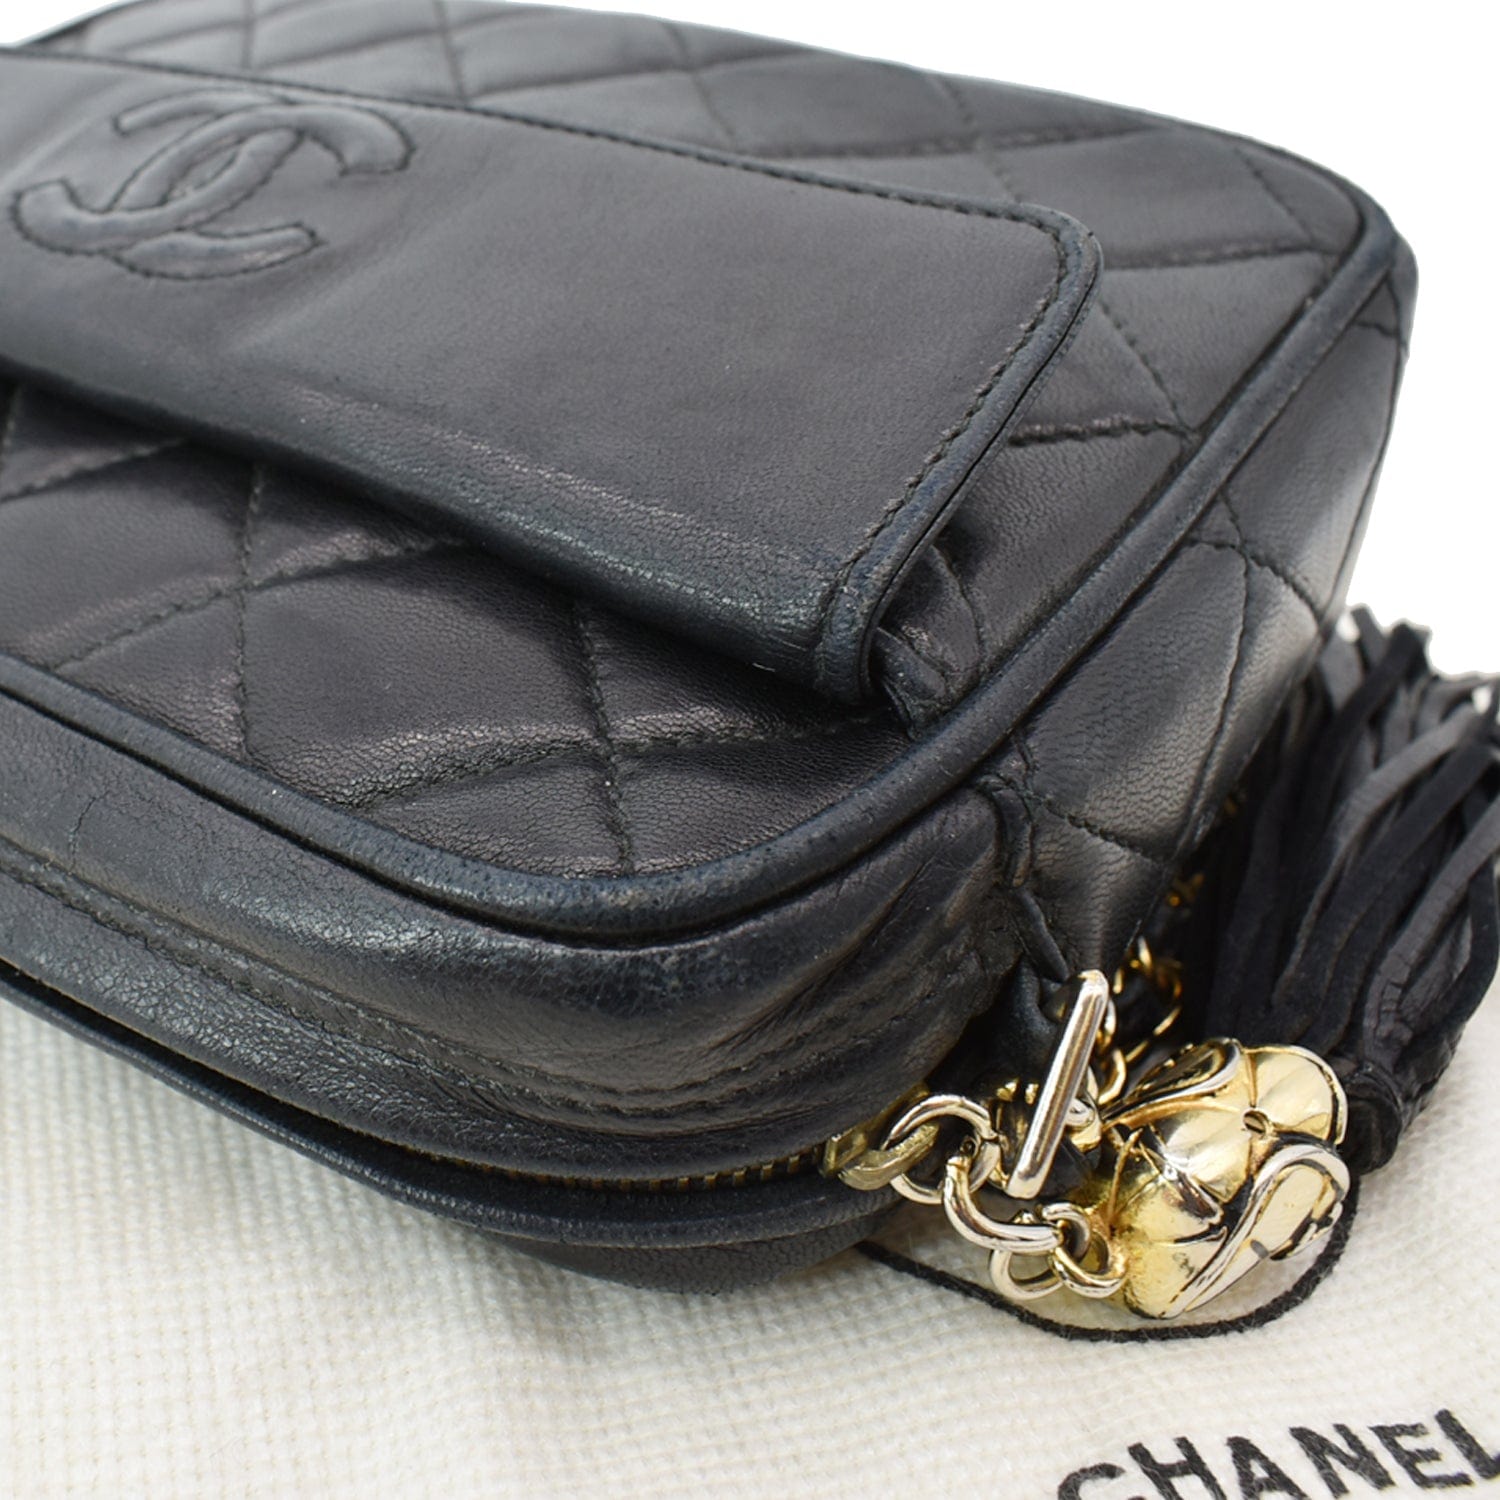 Chanel Black Camera Bag of Quilted Lambskin Leather with Gold